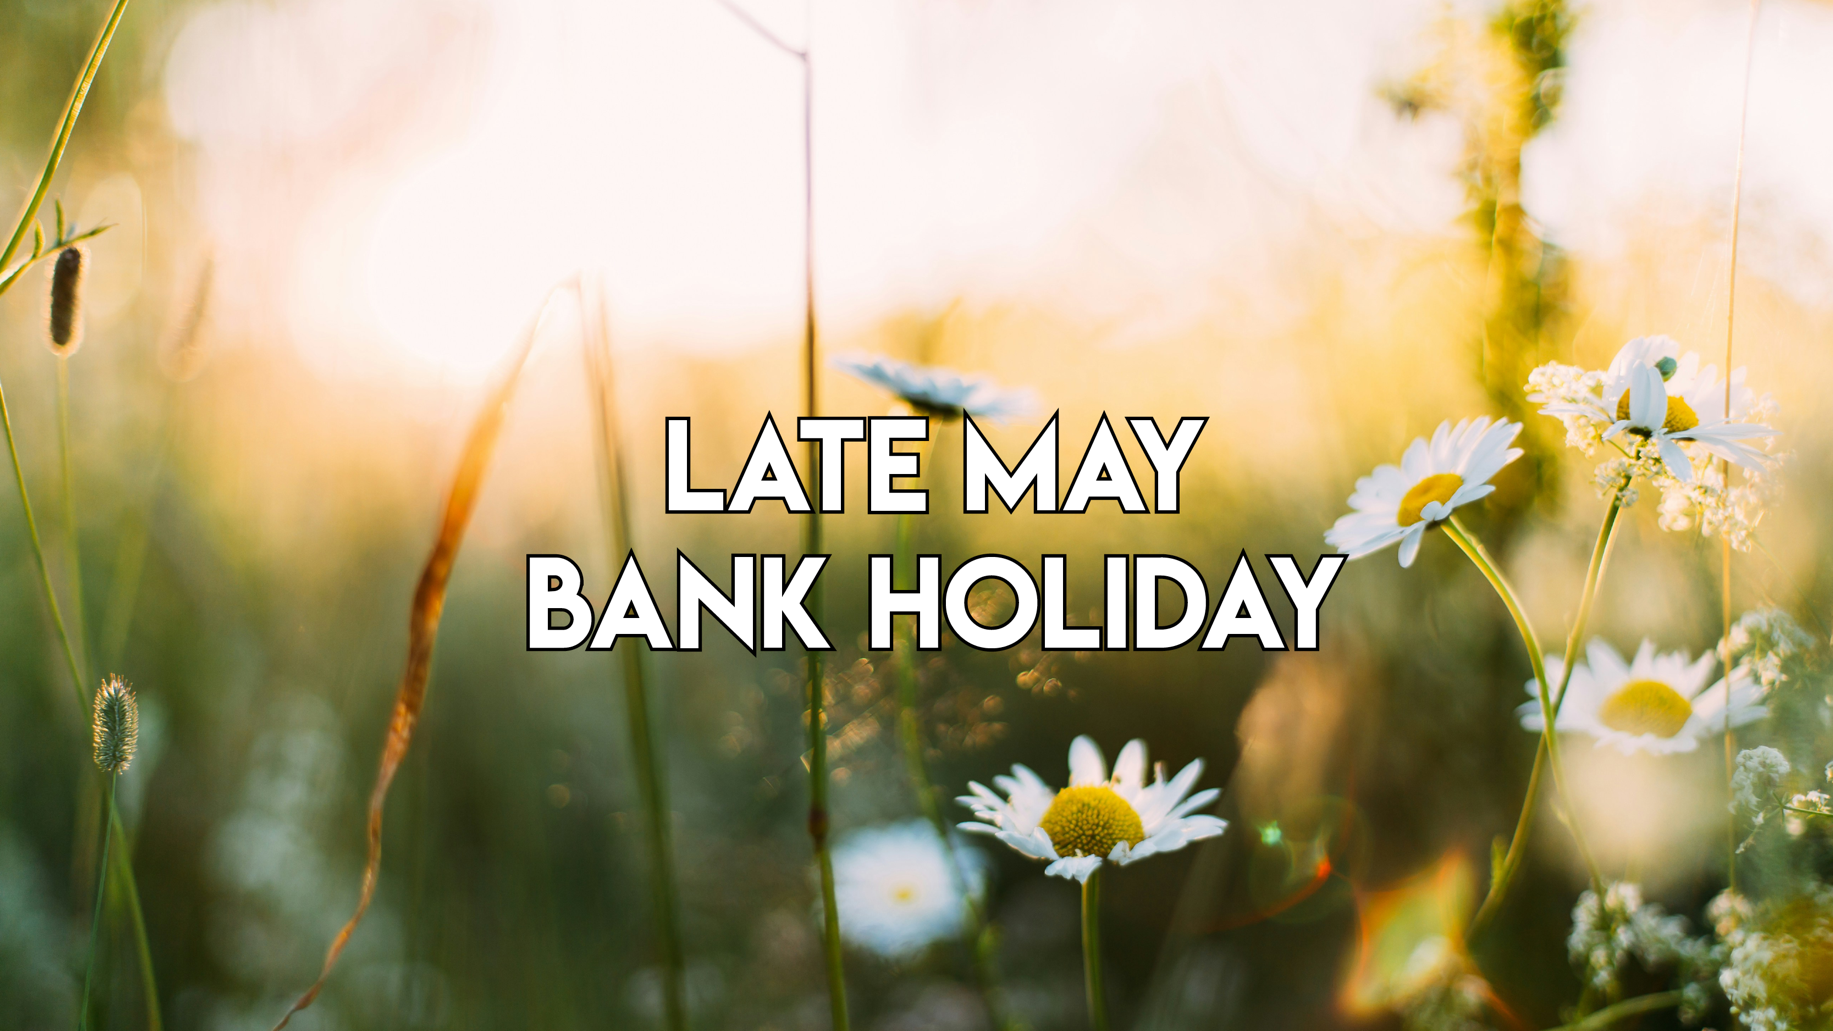 Late May Bank Holiday: We will be closed on Monday, 27th May.